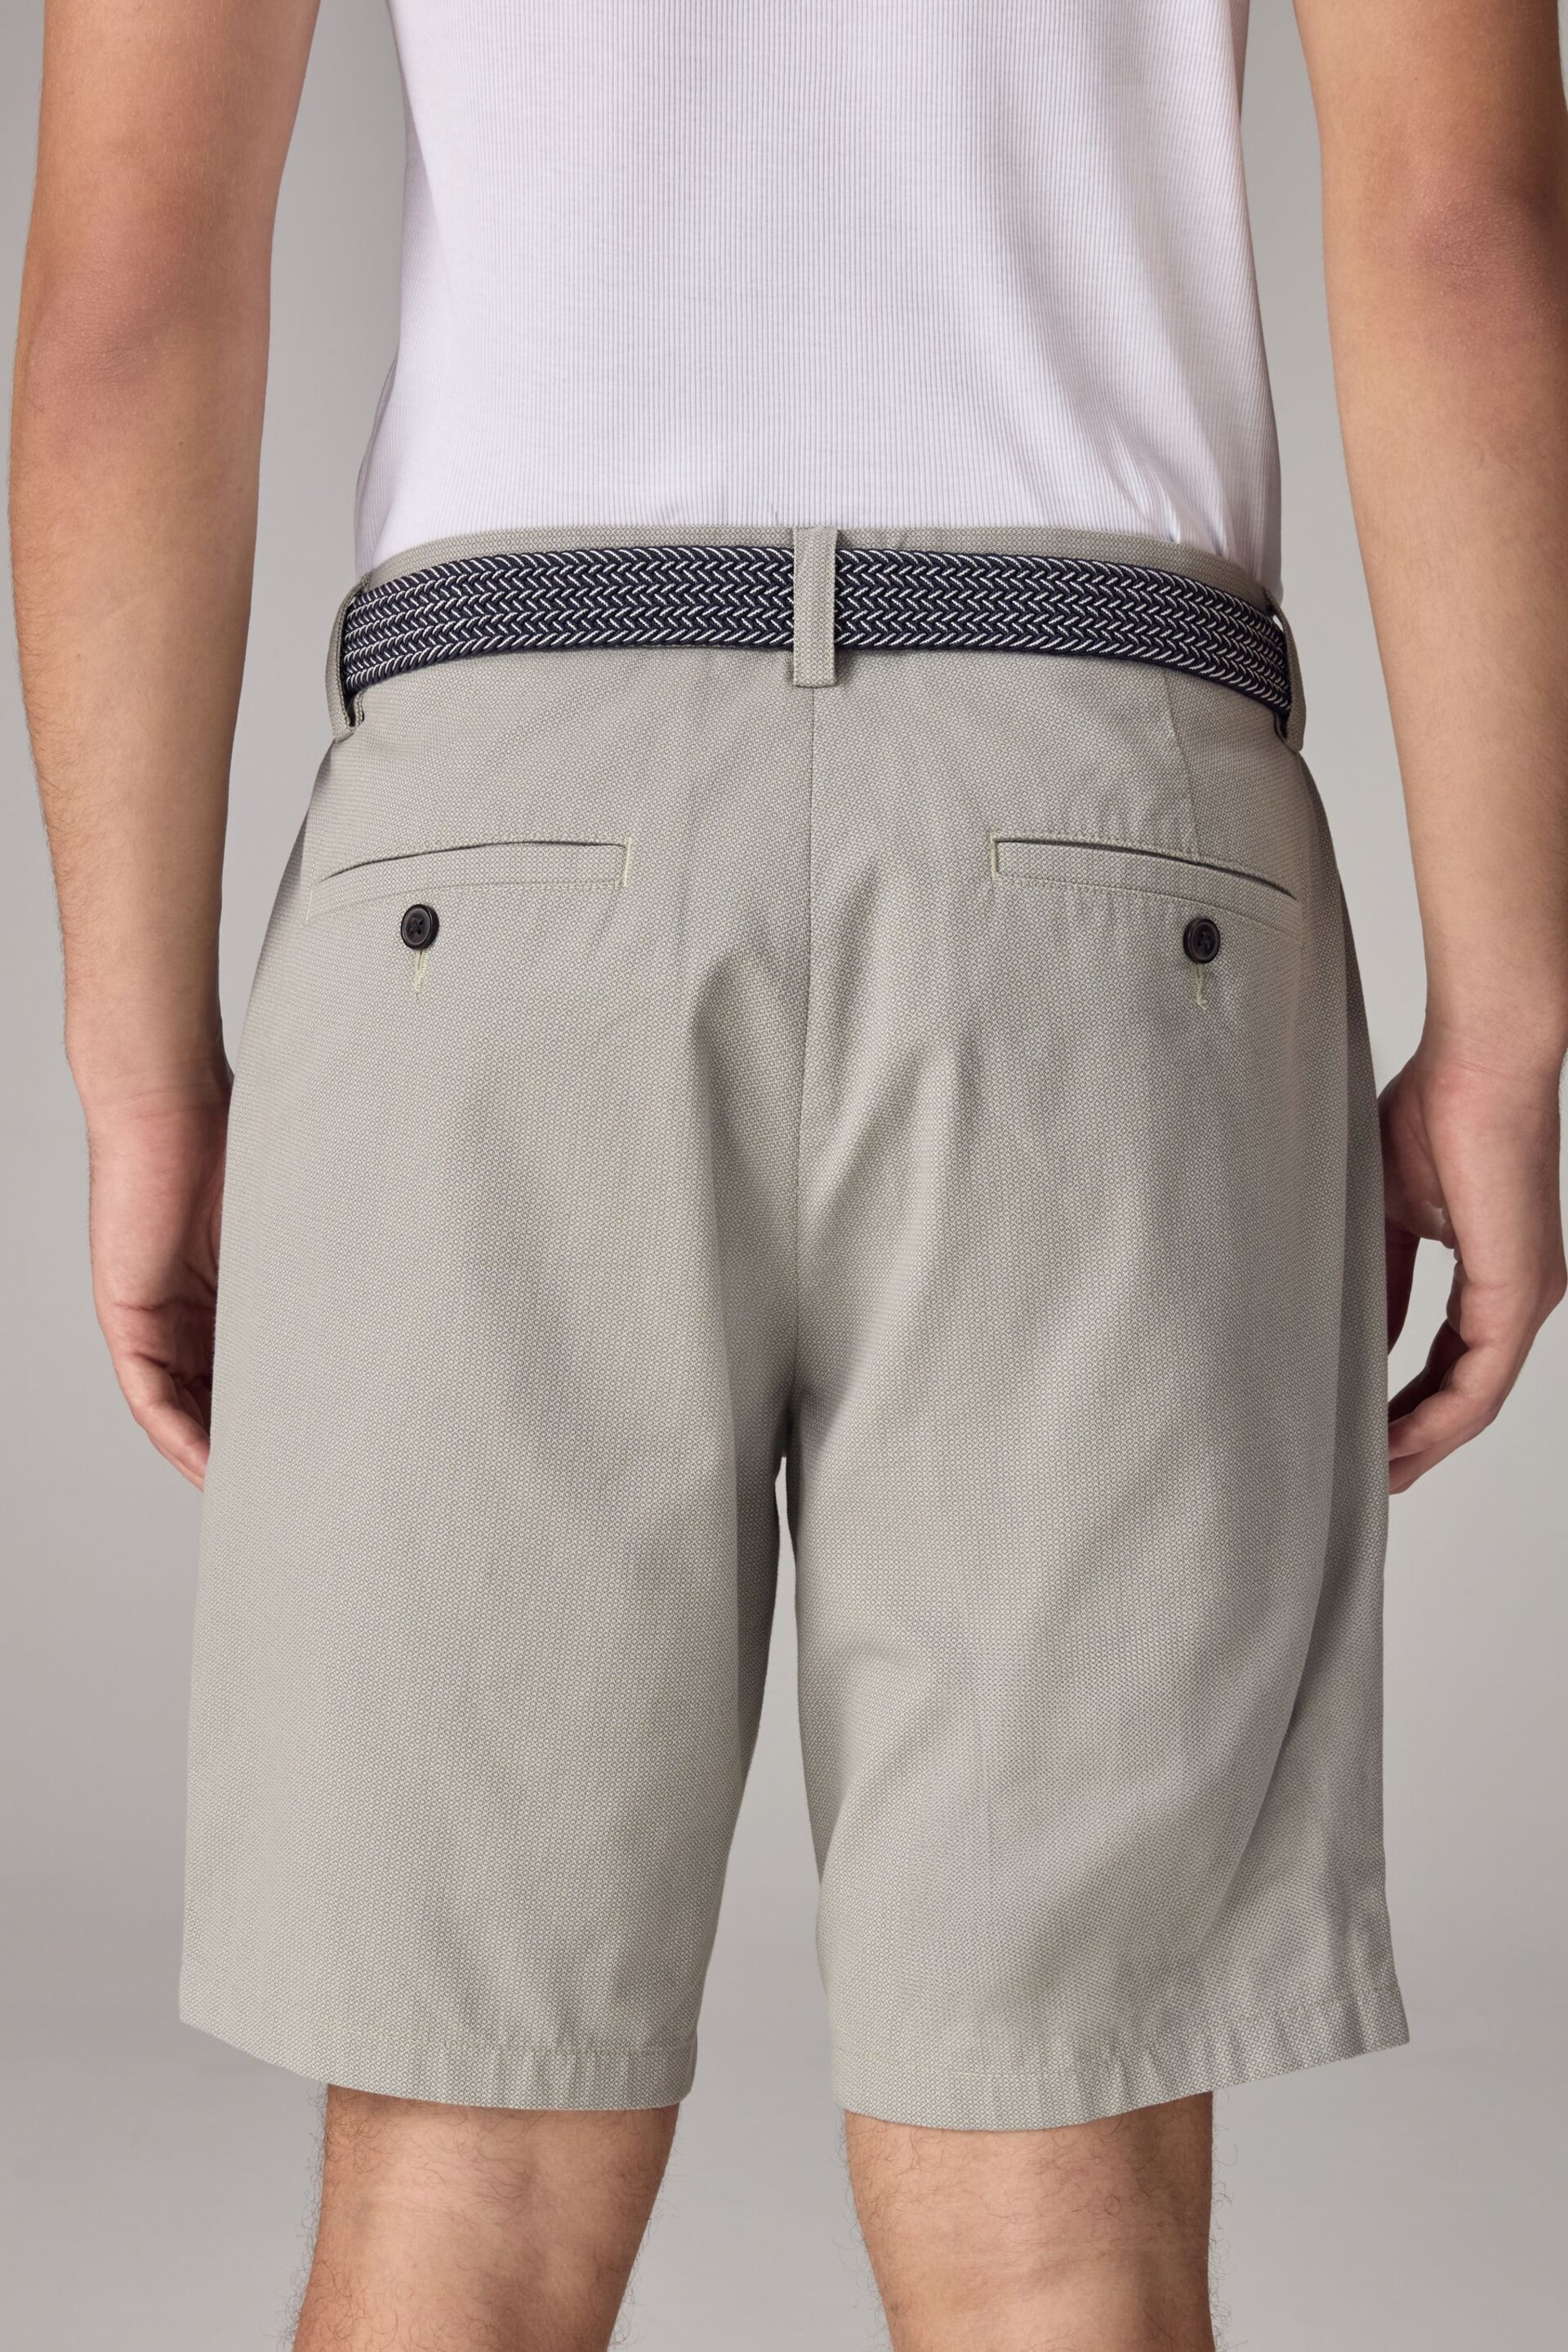 Sage Green Textured Cotton Blend Chino Shorts with Belt Included - Image 3 of 10